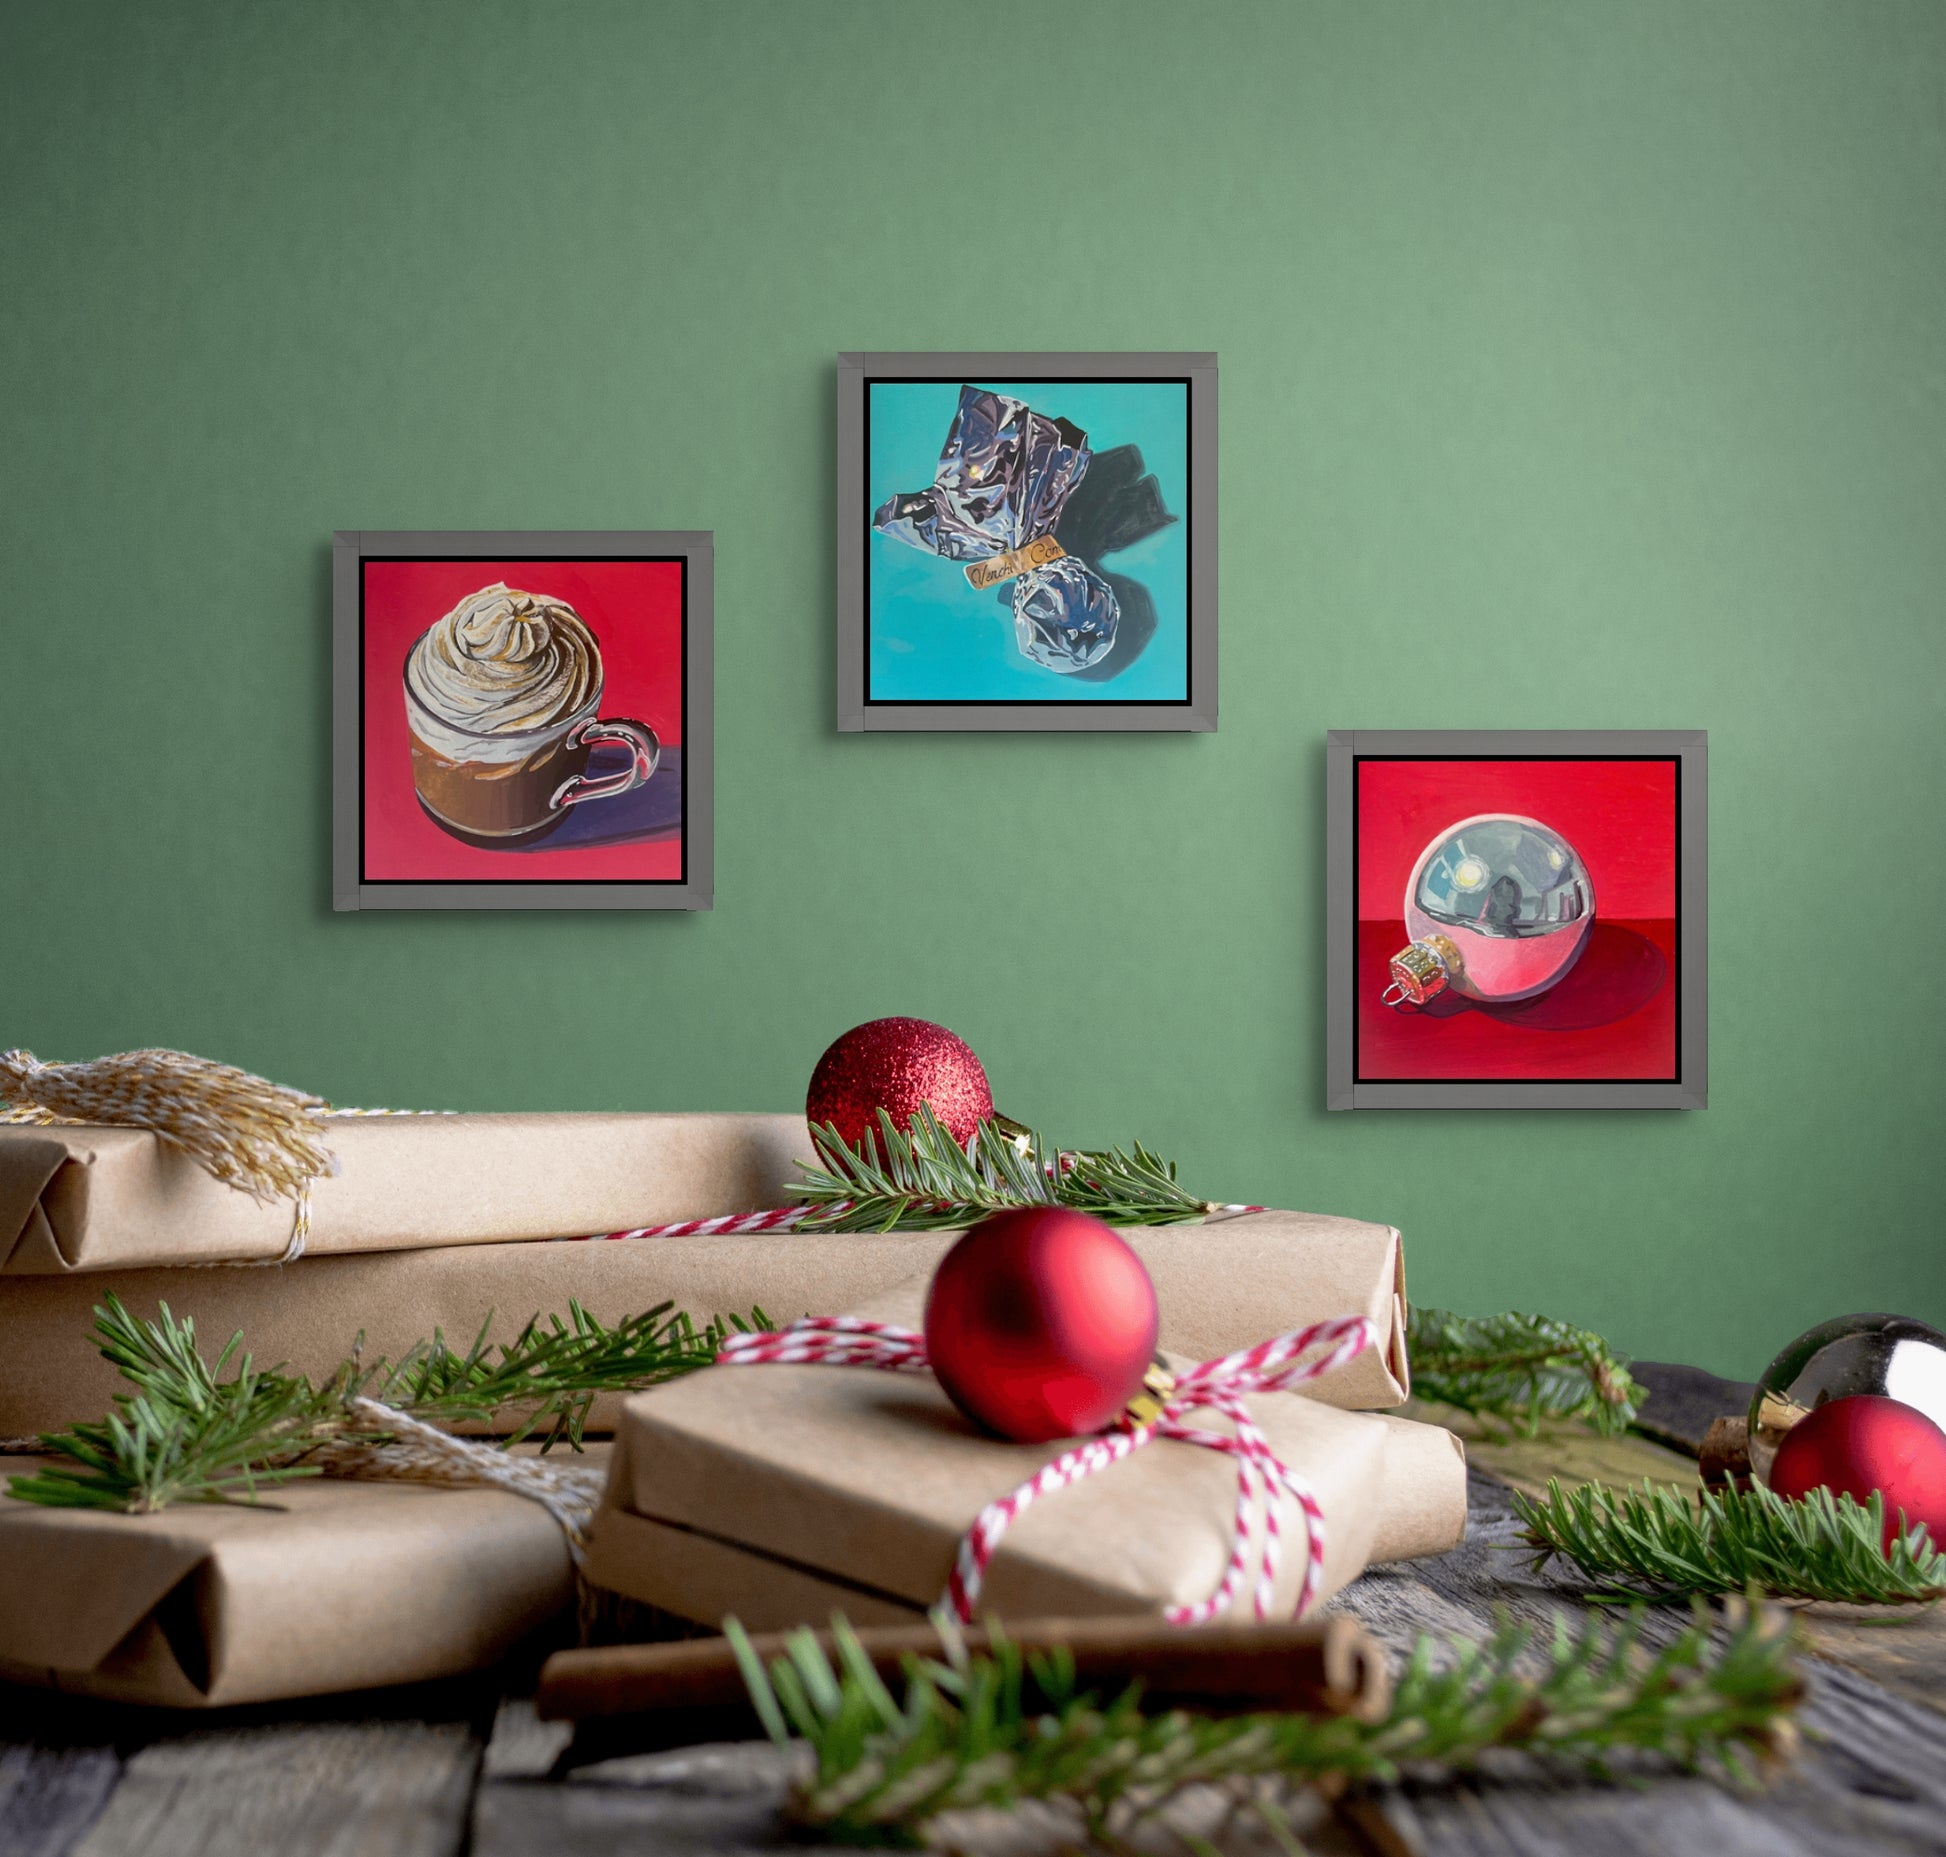 Silver wrapped Venchi chocolate candy on a turquoise background; artist Kate Jarvik Birch; 6"Wx6"H; shown in frame in situ with two other small holiday paintings;